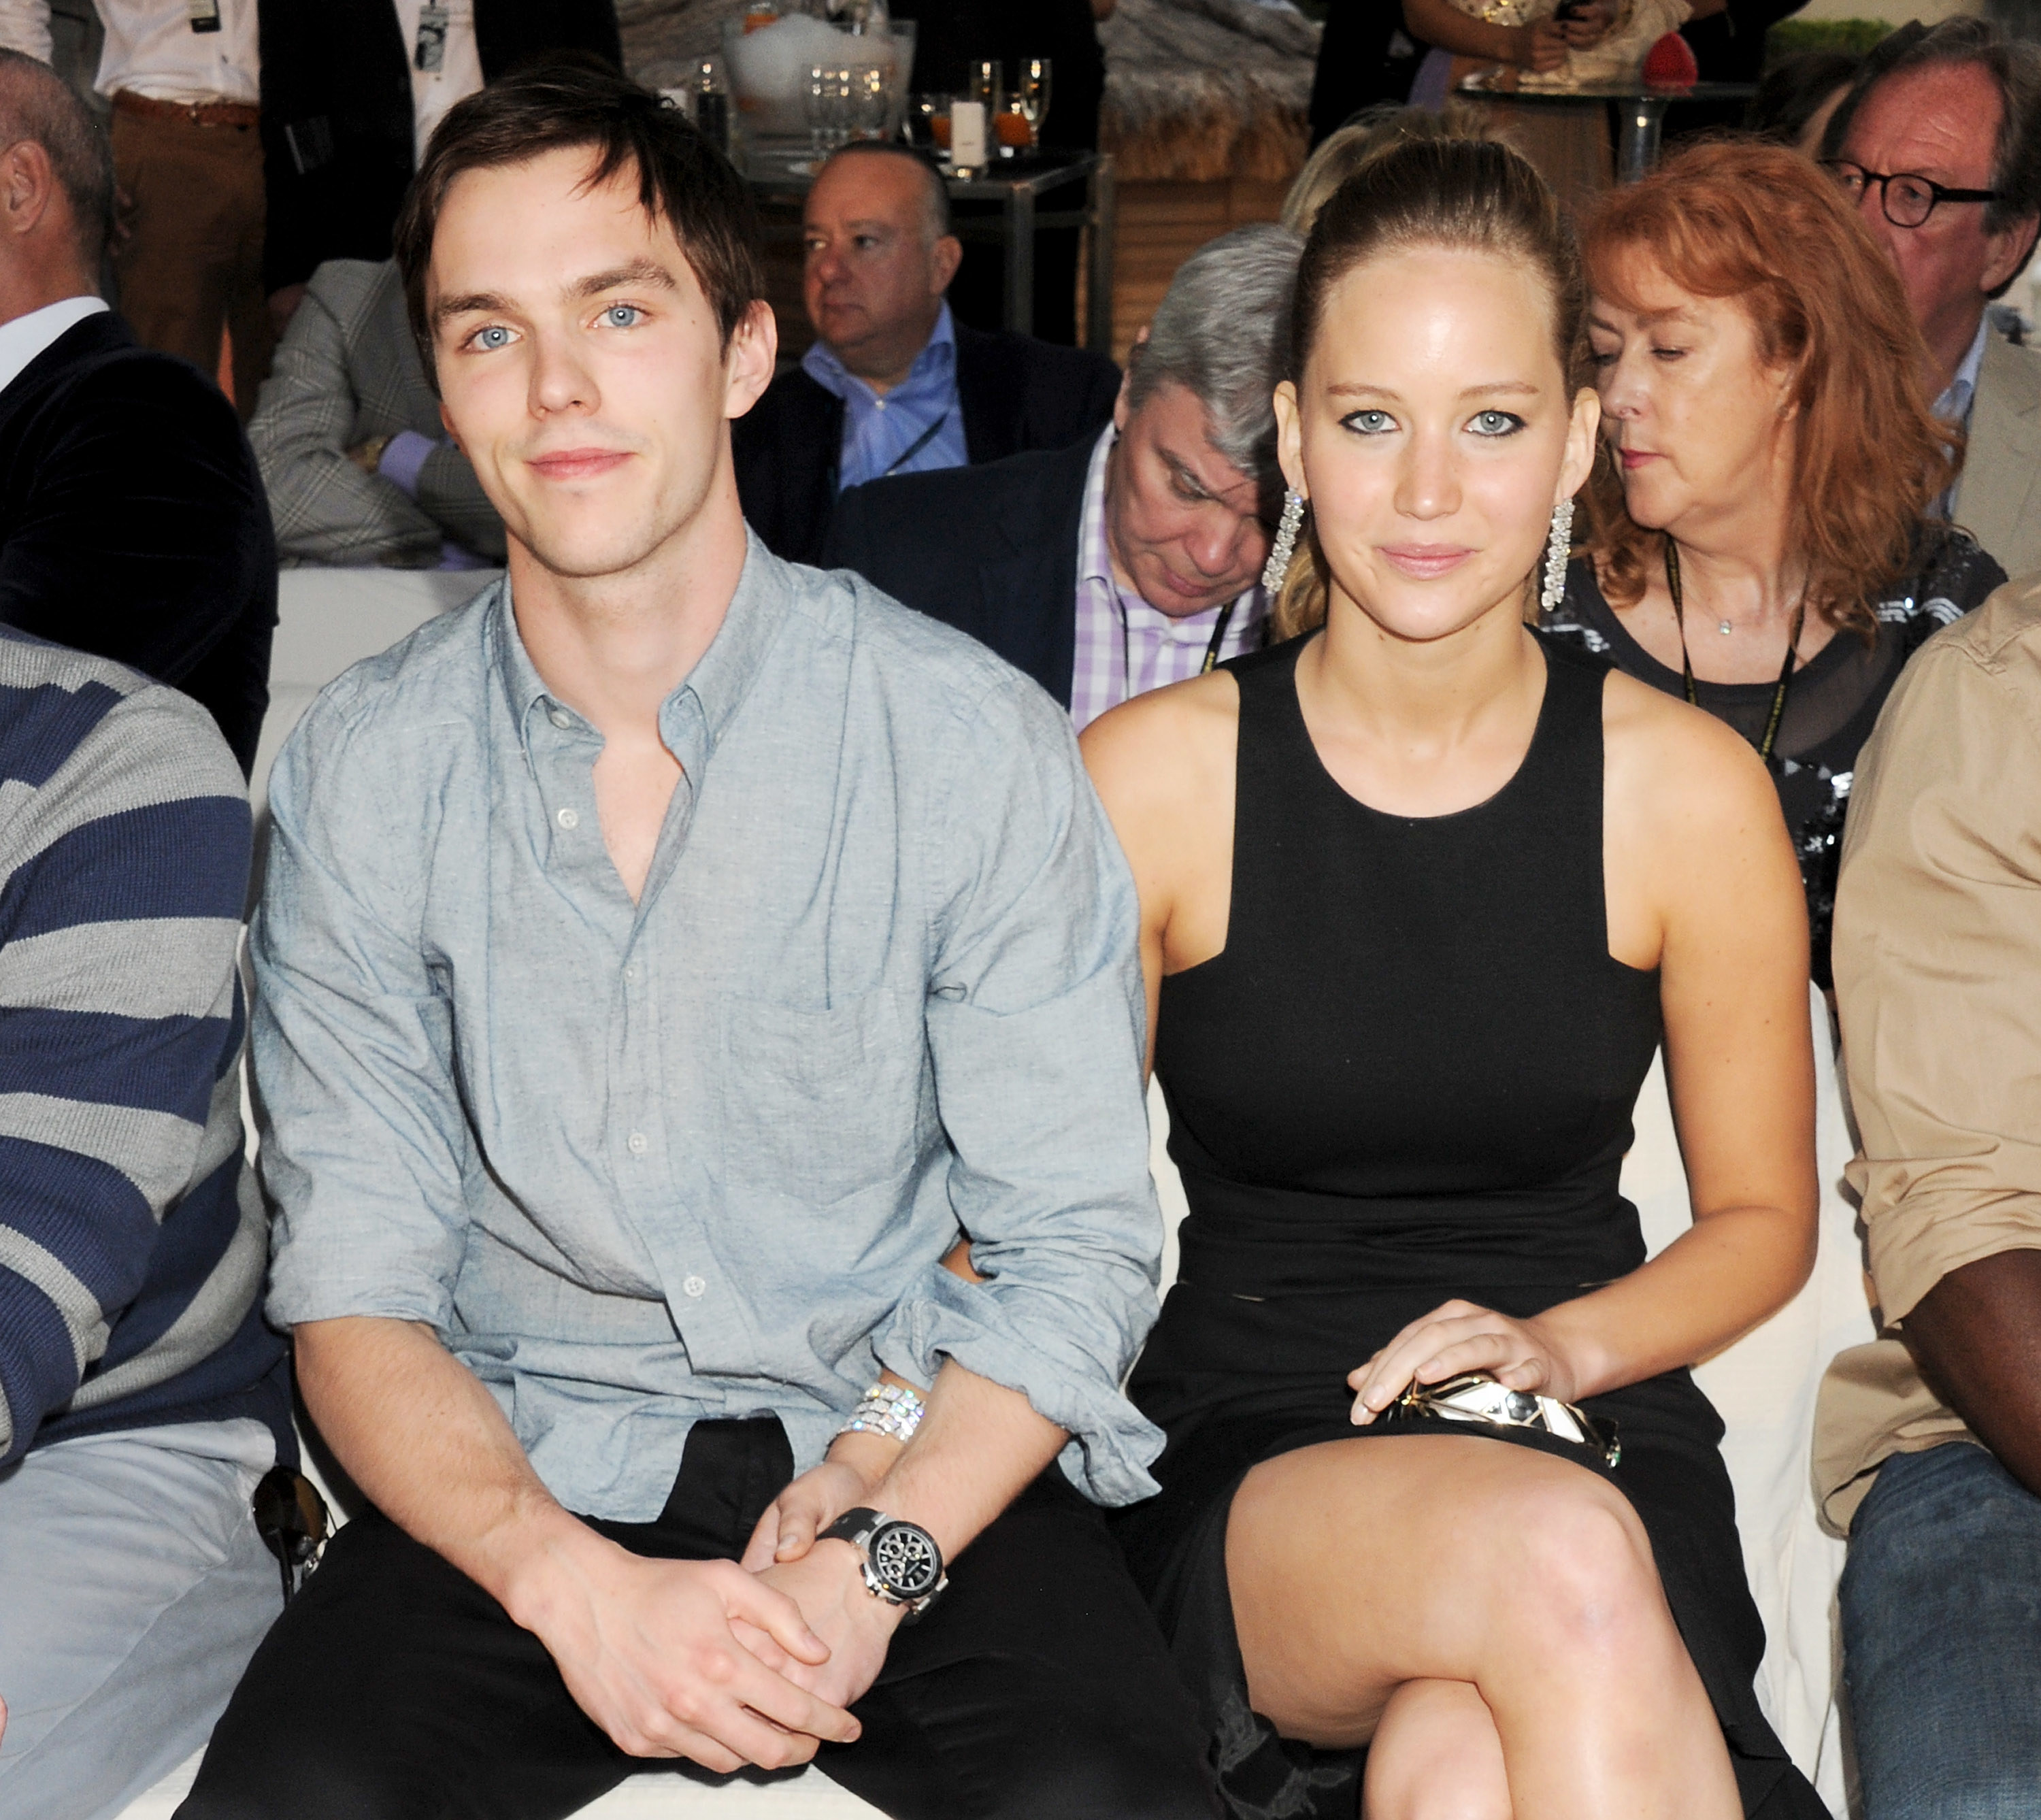 Nicholas Hoult and Jennifer Lawrence at an event in 2012